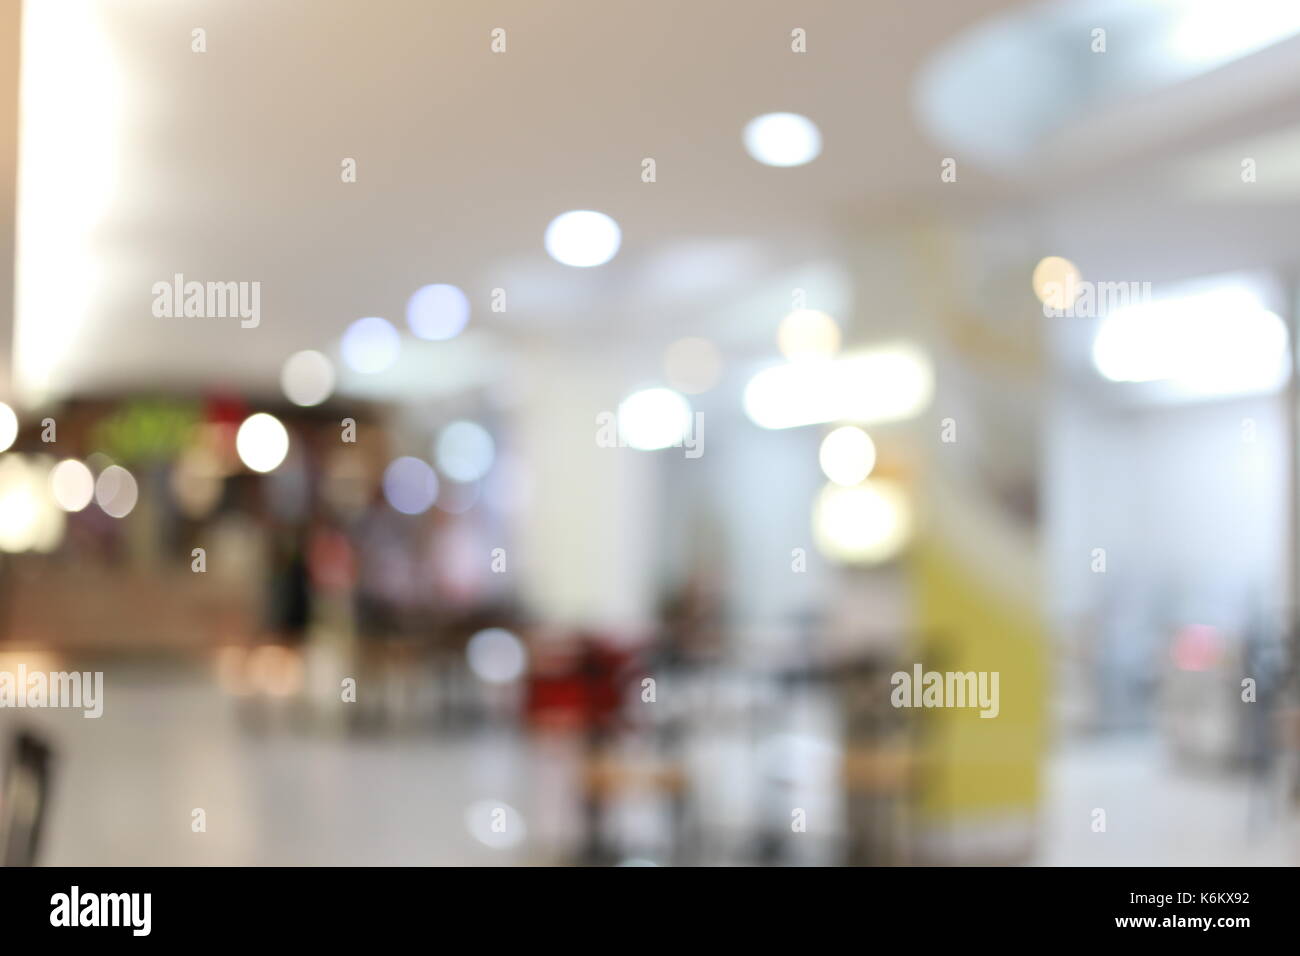 Abstract blur background of Restaurants cafe for design backdrop to Presentation or business promotion. Stock Photo